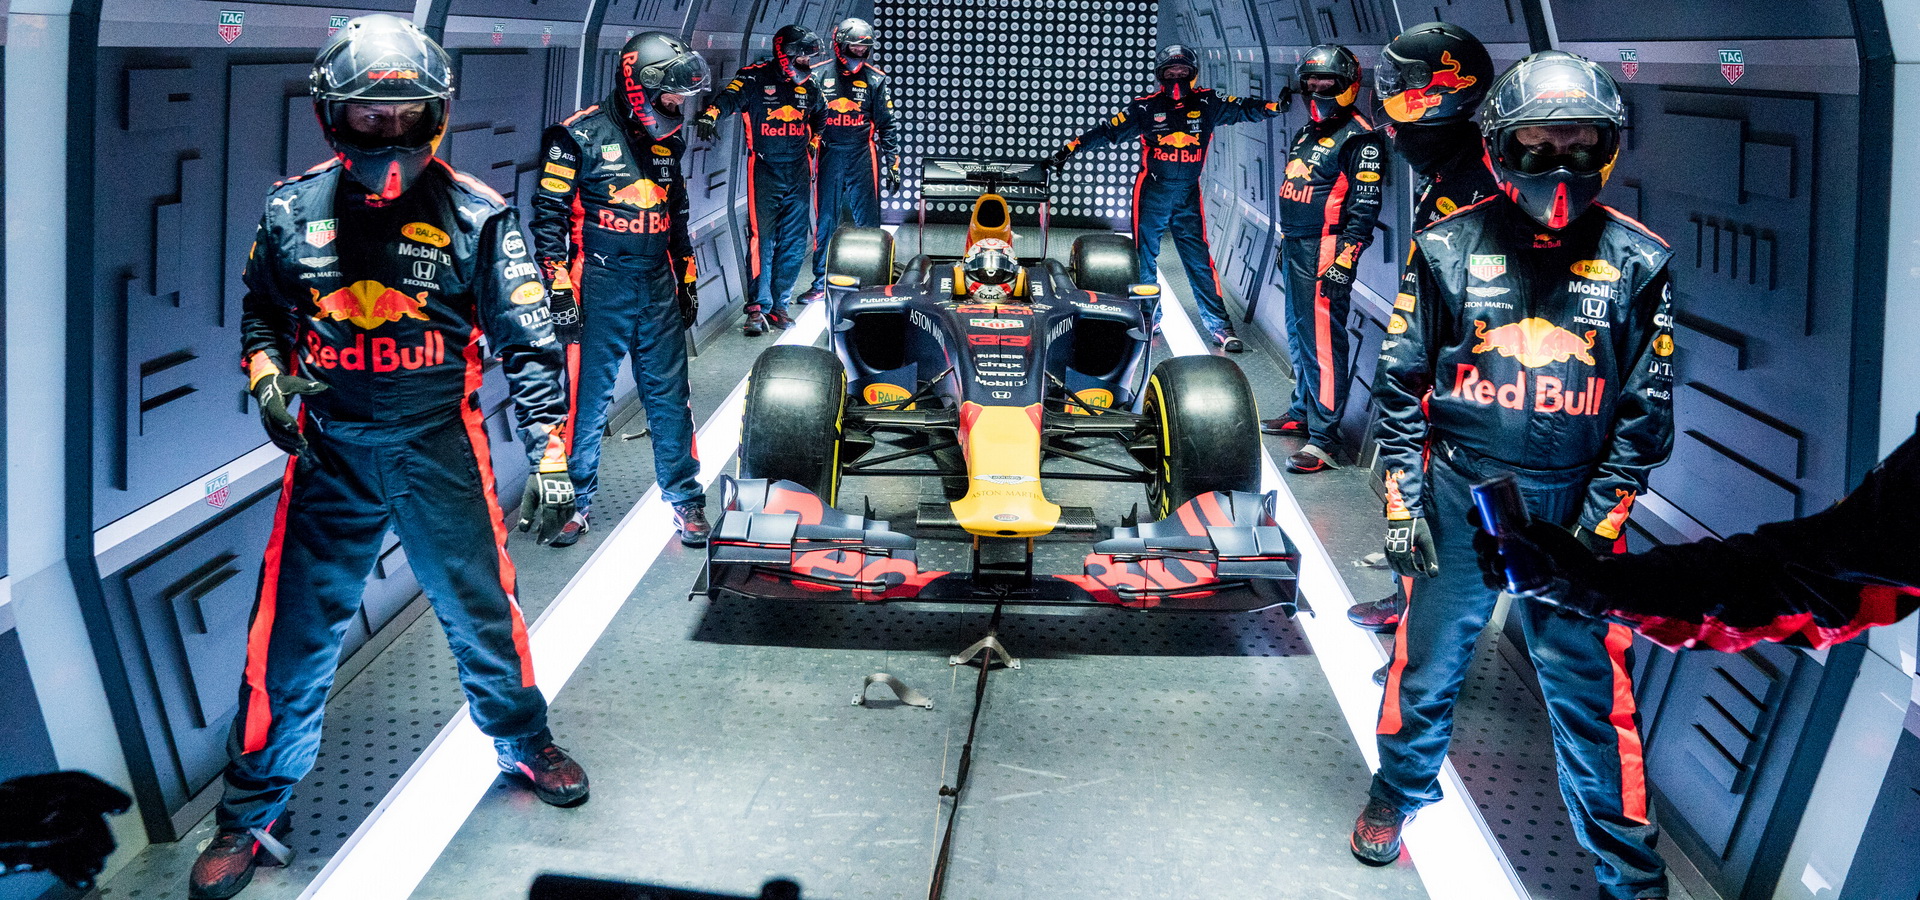 Red Bull Racing Got Bored, So They Performed A Zero Gravity Pit Stop